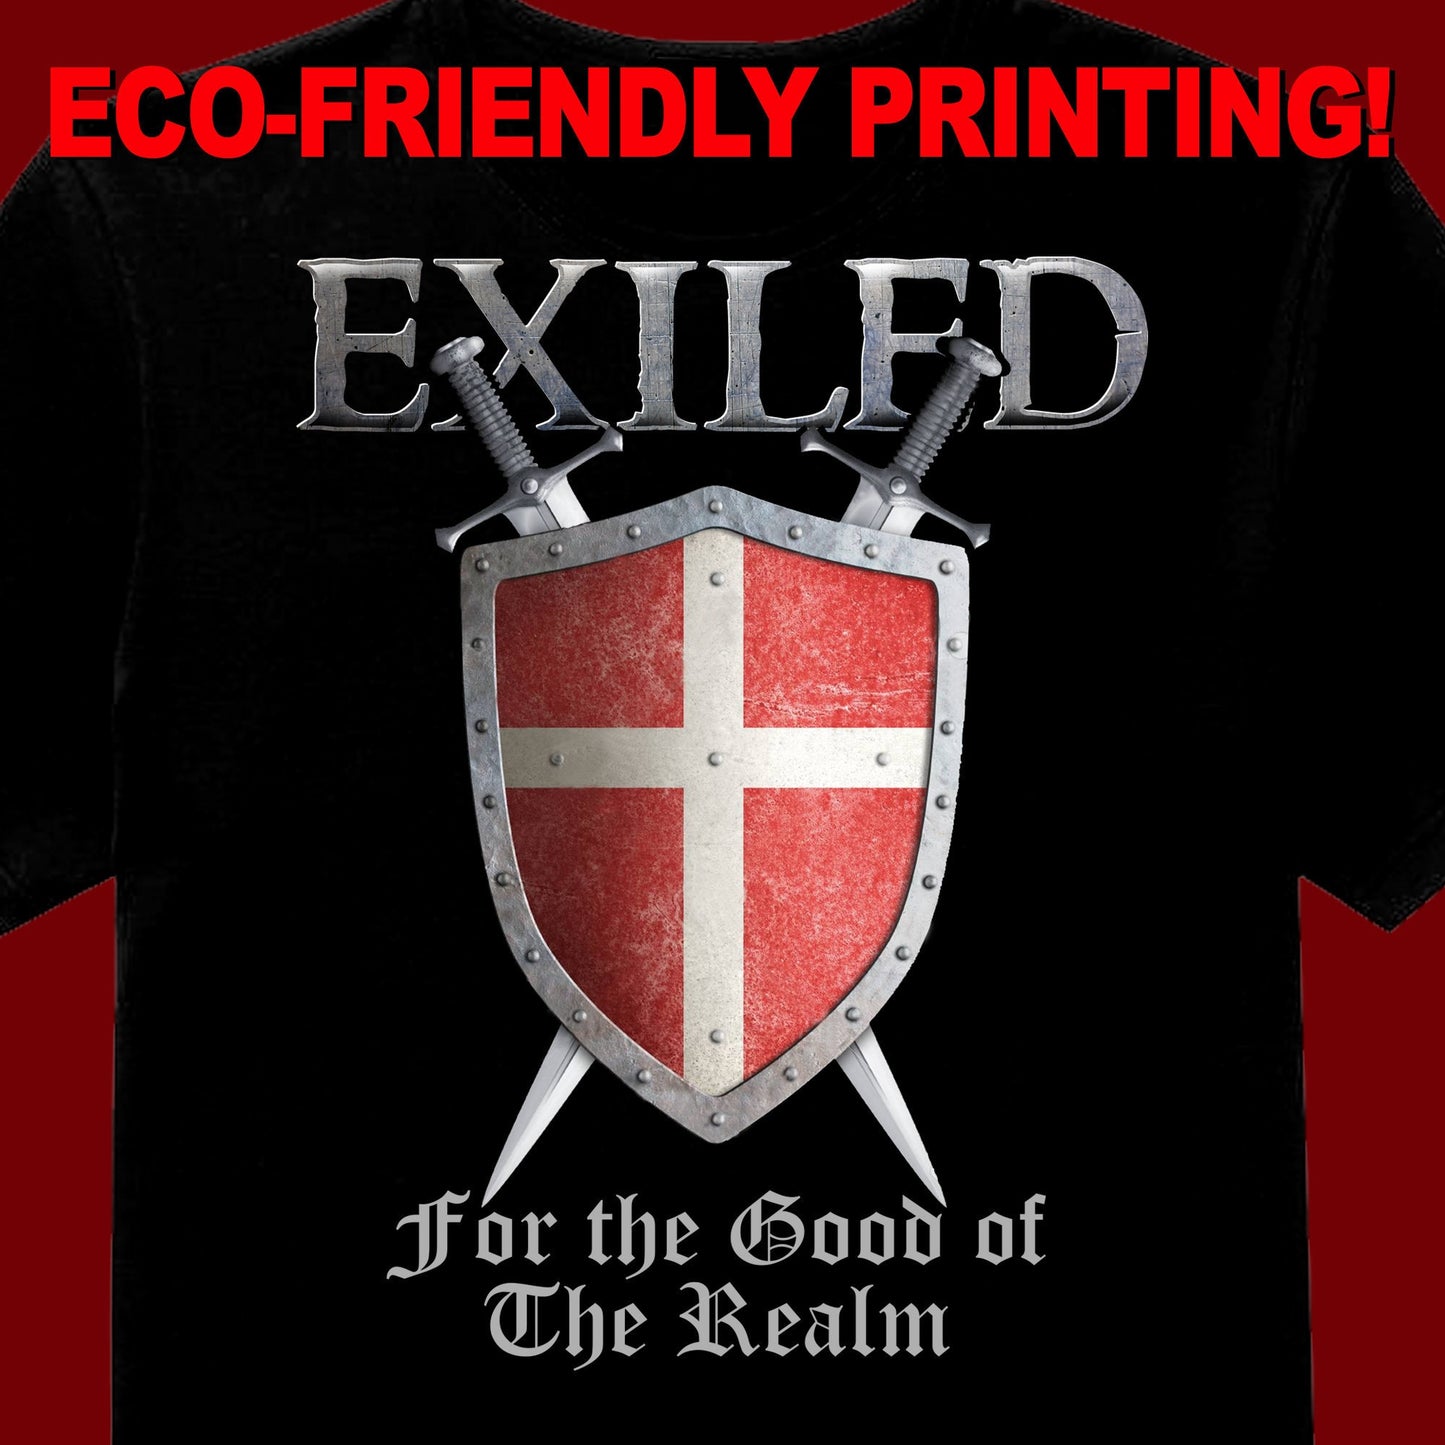 EXILED / Exiled for the good of the Realm / Renaissance T Shirt / Medieval Tee / Social Distancing